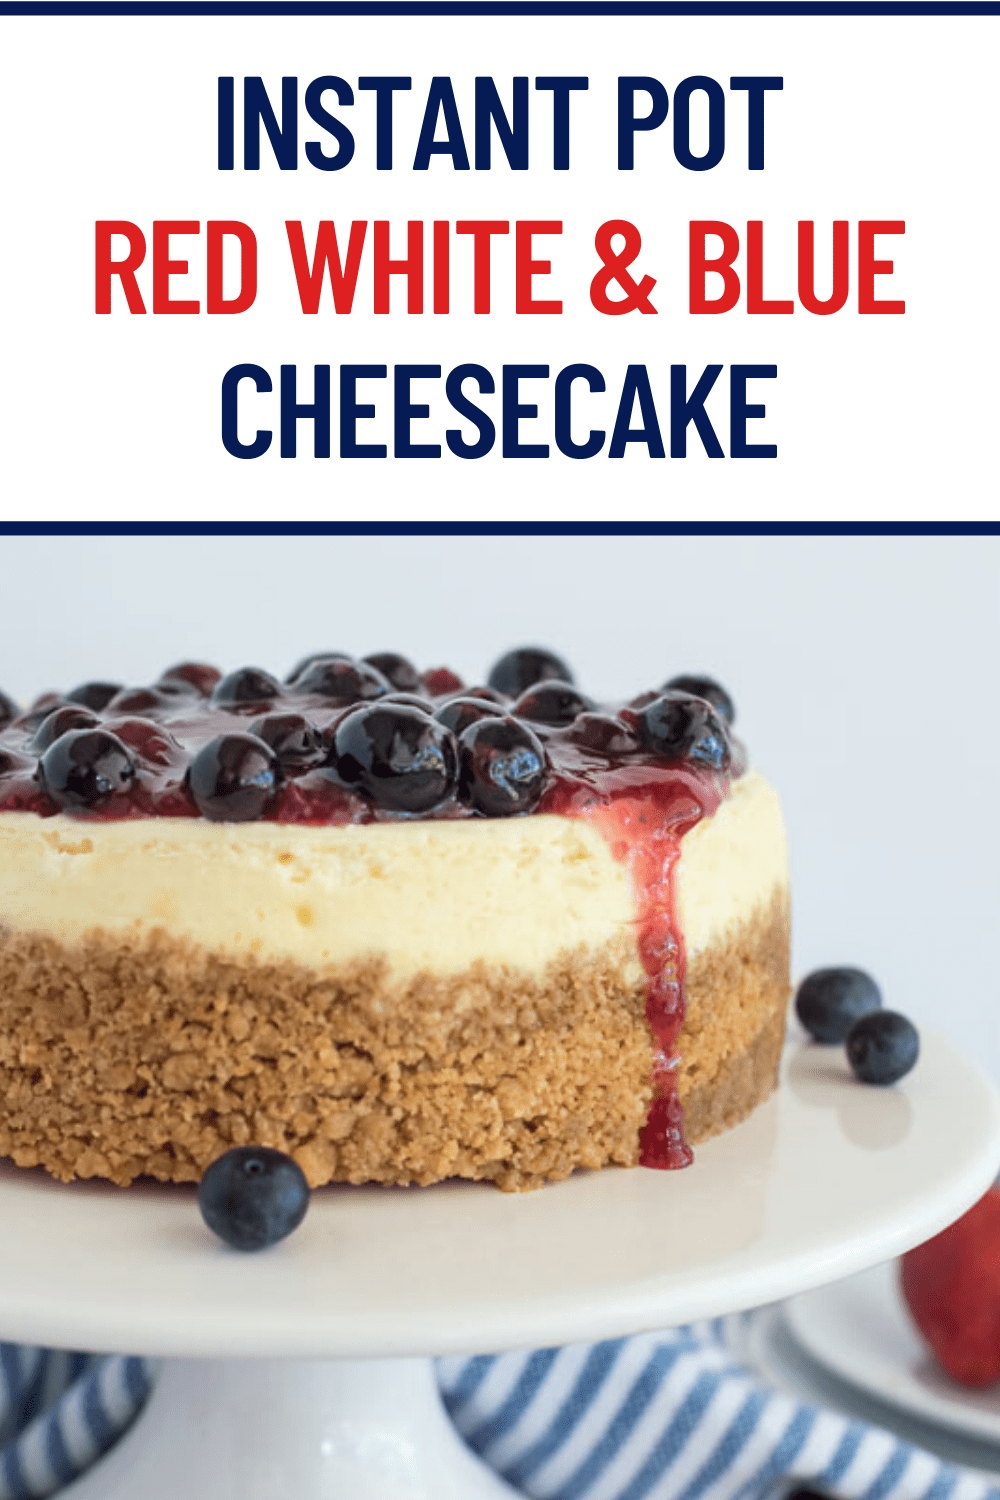 Red White and Blue Cheesecake is creamy, topped with summer berries, and SO EASY to make! It's the BEST Instant Pot cheesecake for the Fourth of July or any summer event! #pressurecooking #instantpot #cheesecake #4thofJuly #dessert via @PressureCook2da